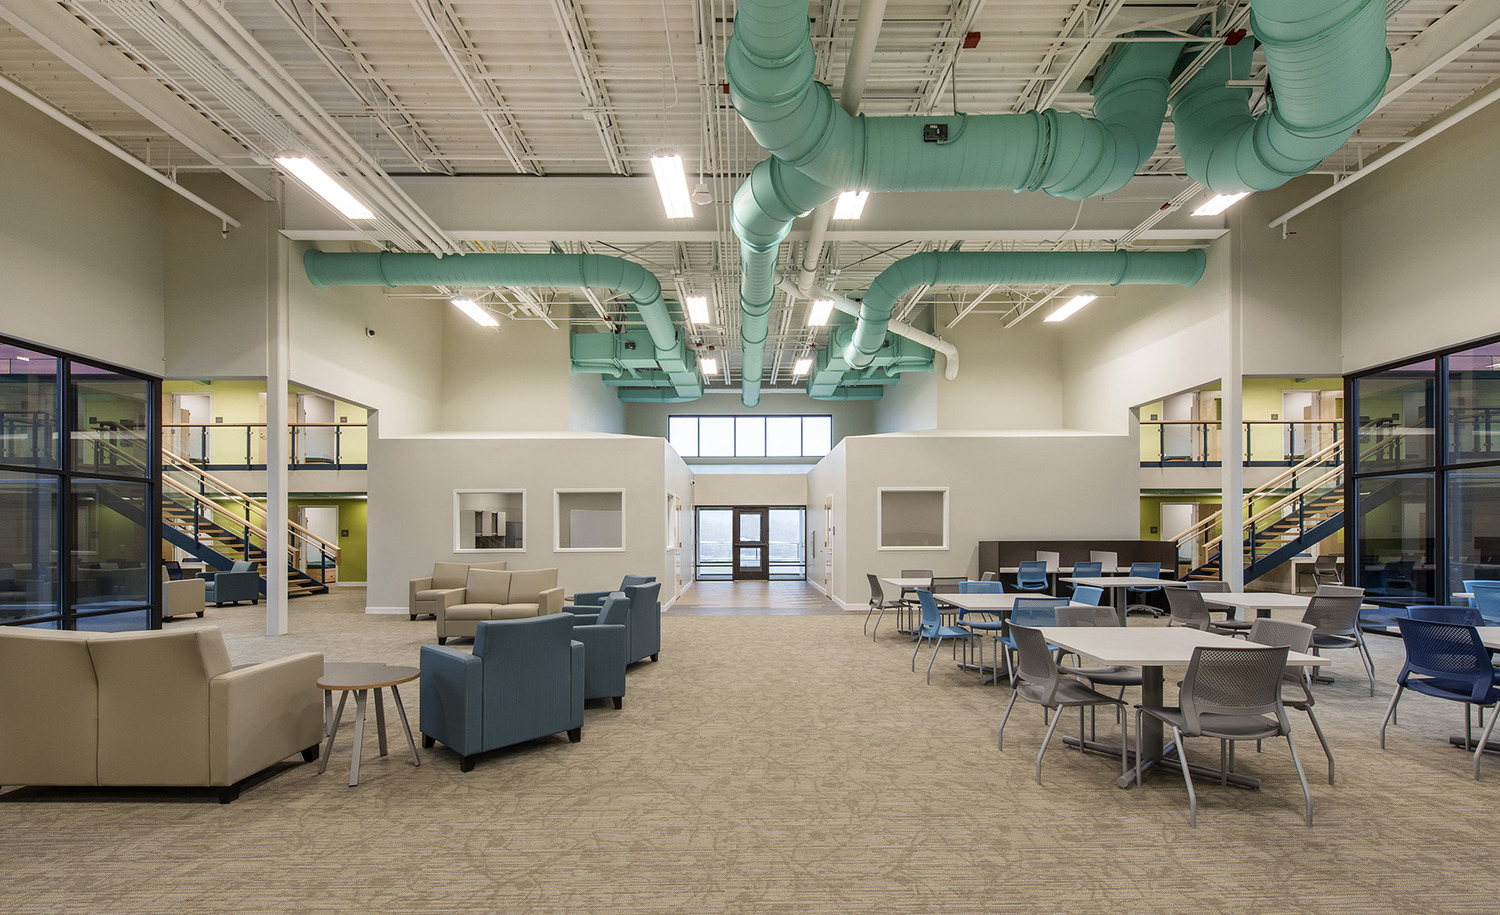 Brightly painted duct work provides a colorful accent to the central great room. To the left, upholstered chairs and couches create a lounge space for residents. To the right, tables and chairs provide room for activities.